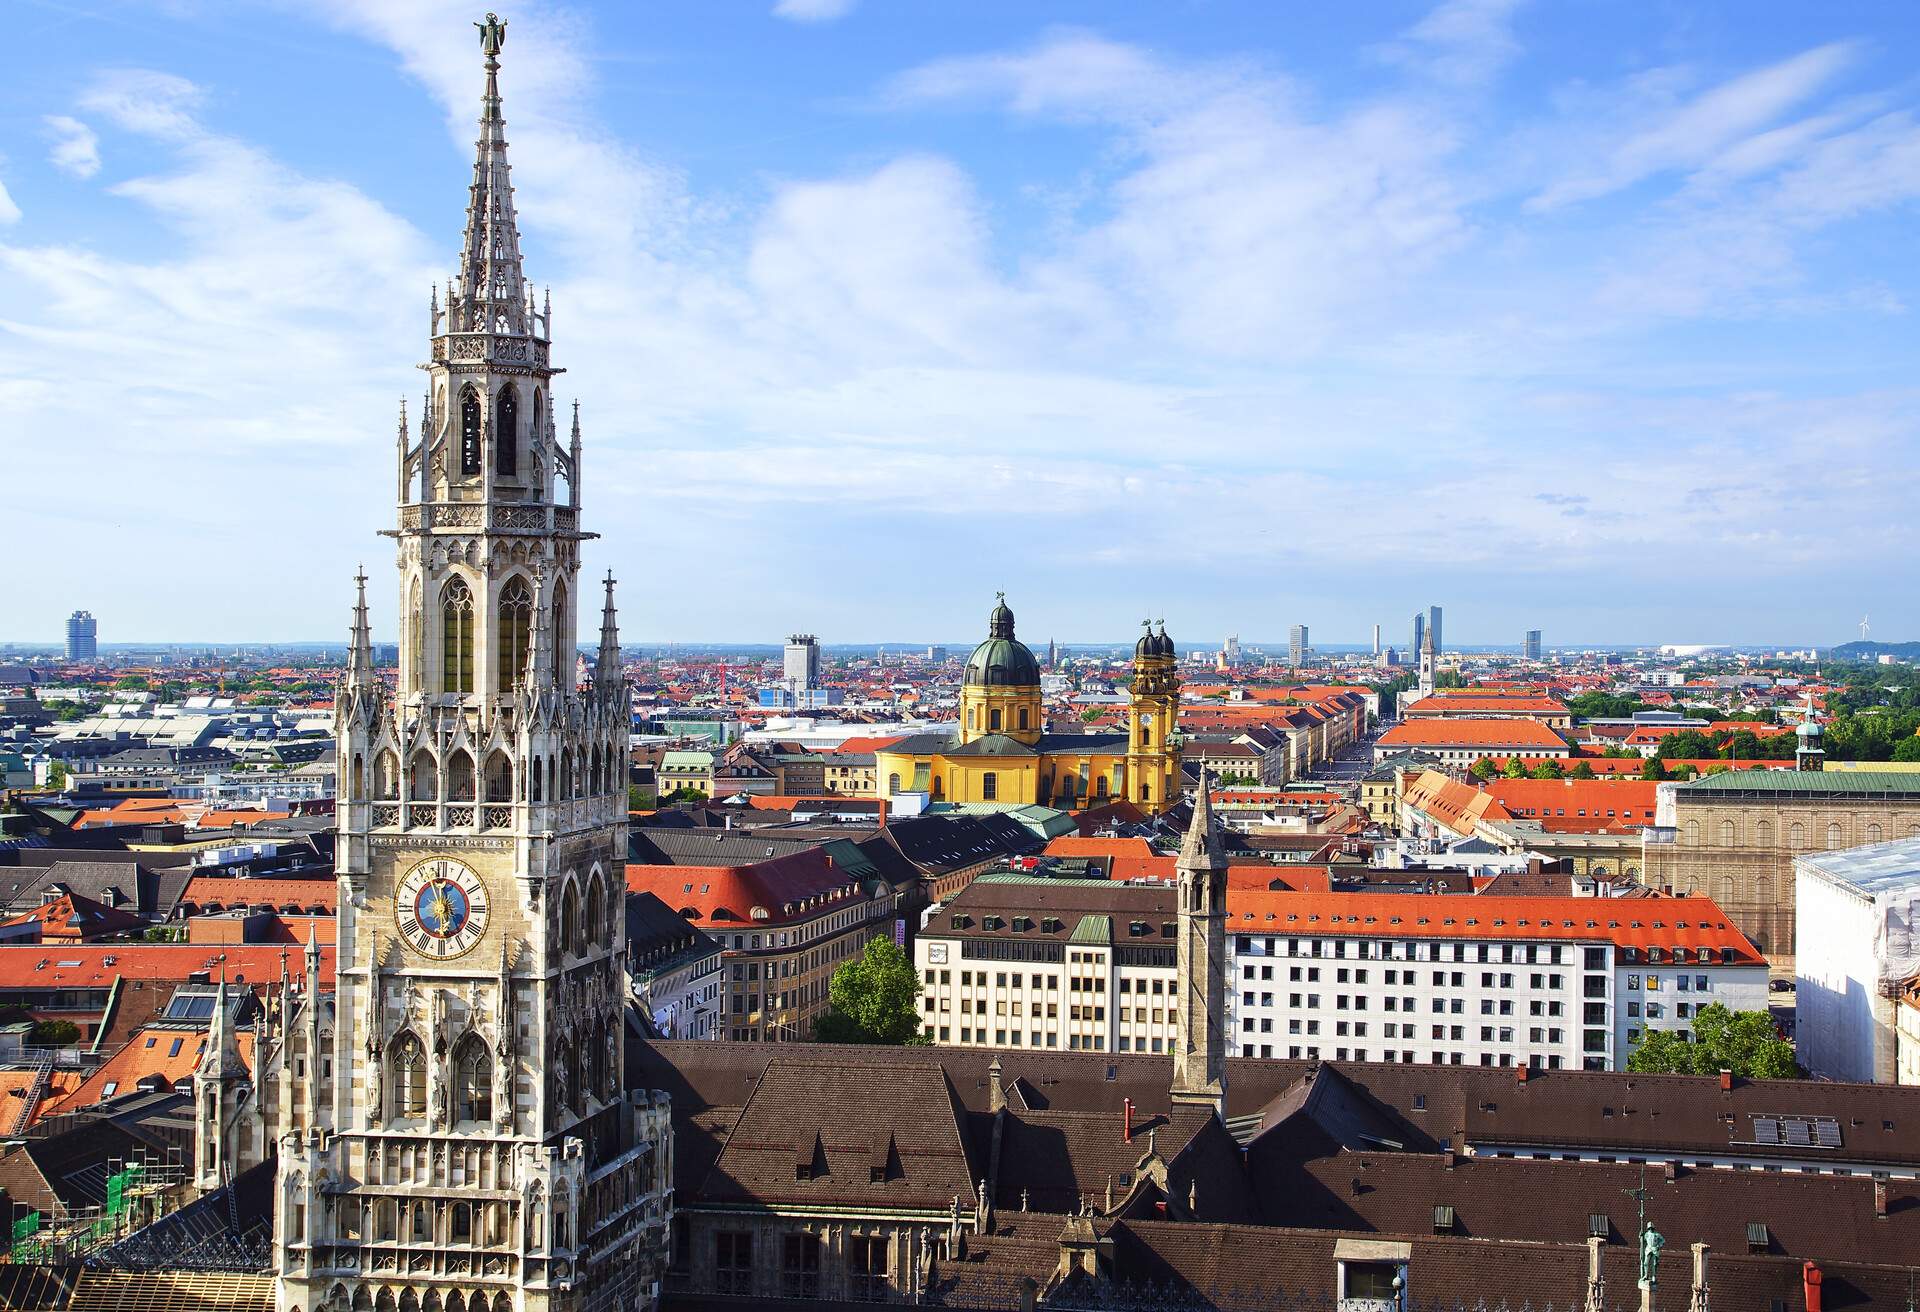 The panorama view of Munchen city centre. Munich, Germany; Shutterstock ID 107481257